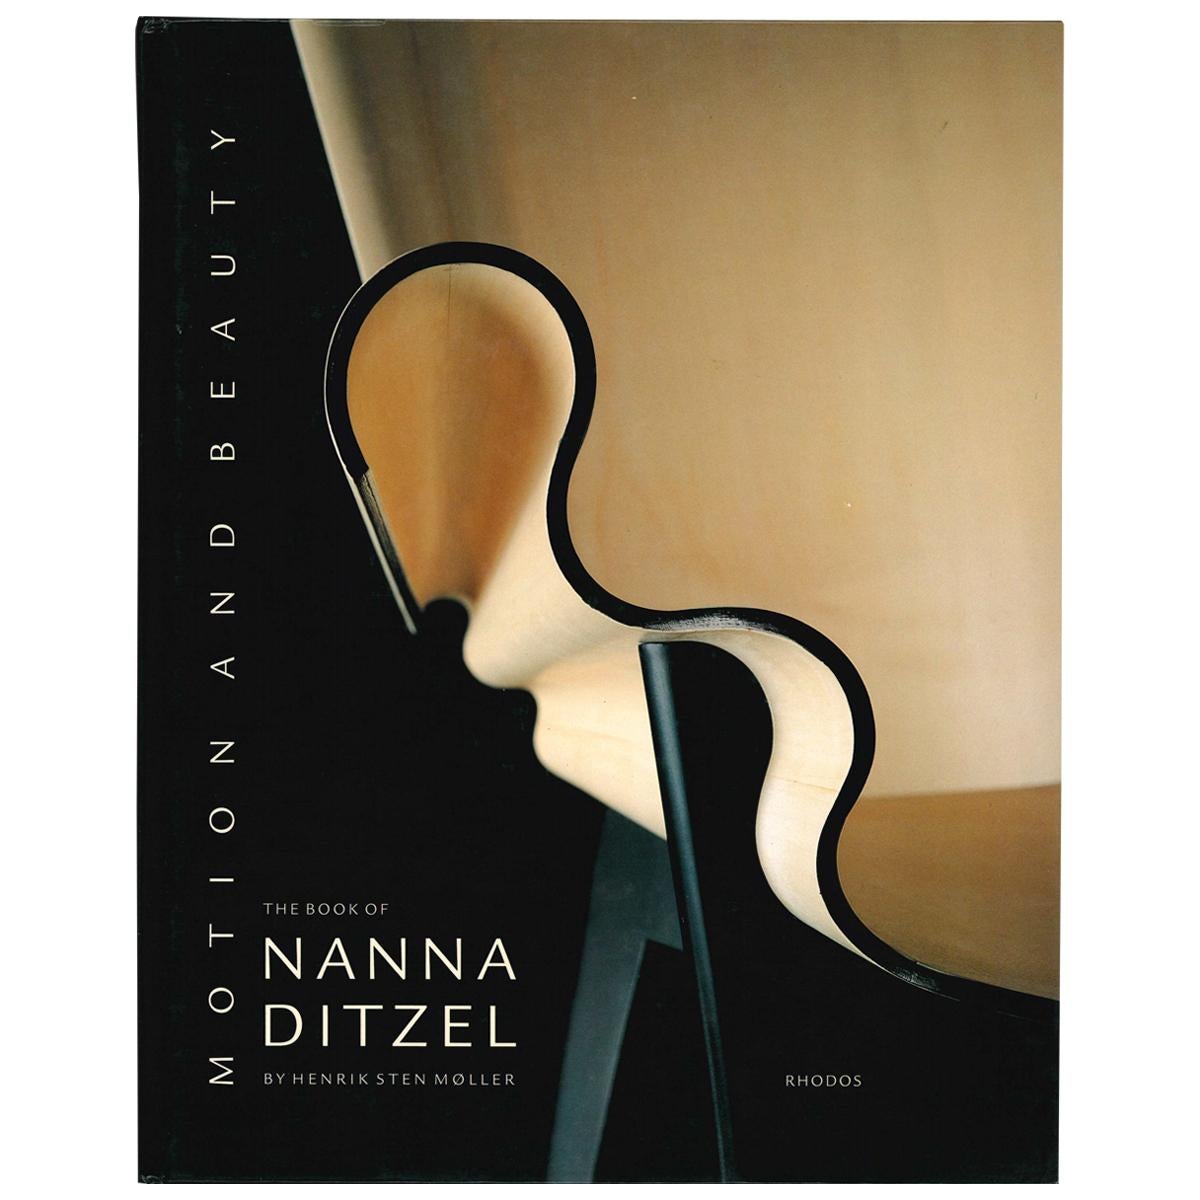 Motion and Beauty: The Book of Nanna Ditzel by Henrik Sten Moller (Book)